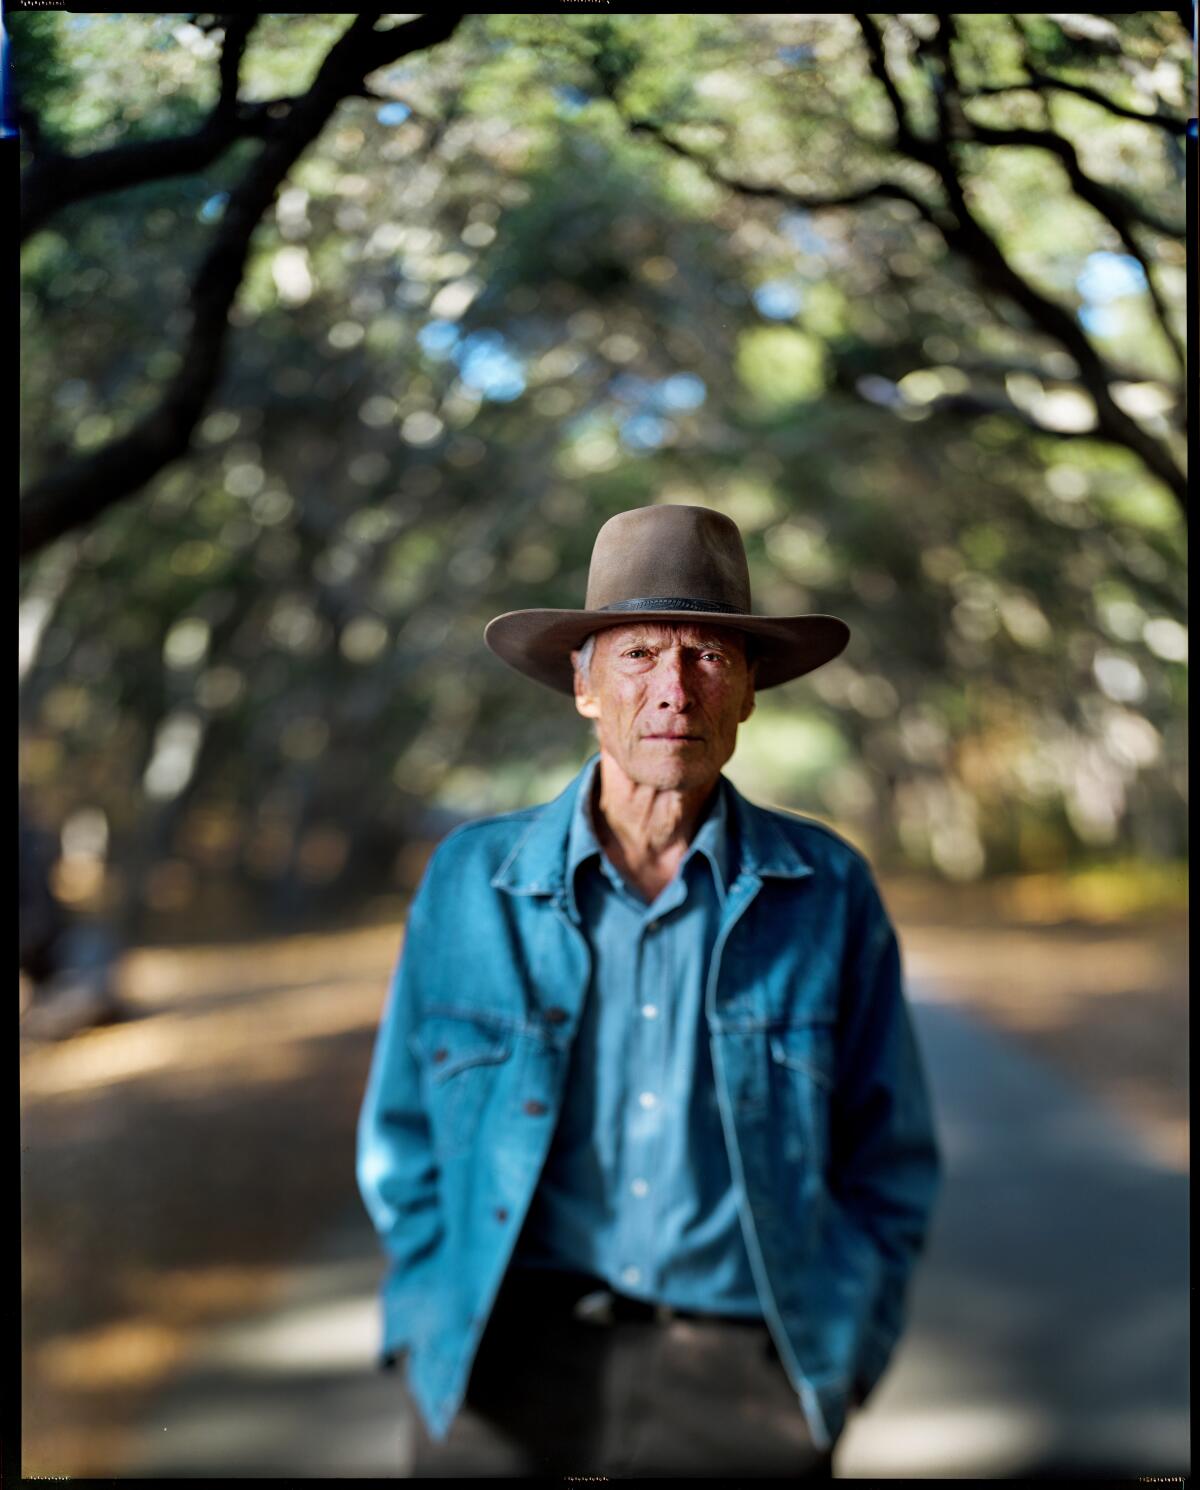 Clint Eastwood, 91, photographed with an 8x10 film camera on the grounds of his Tehama Golf Club in Carmel